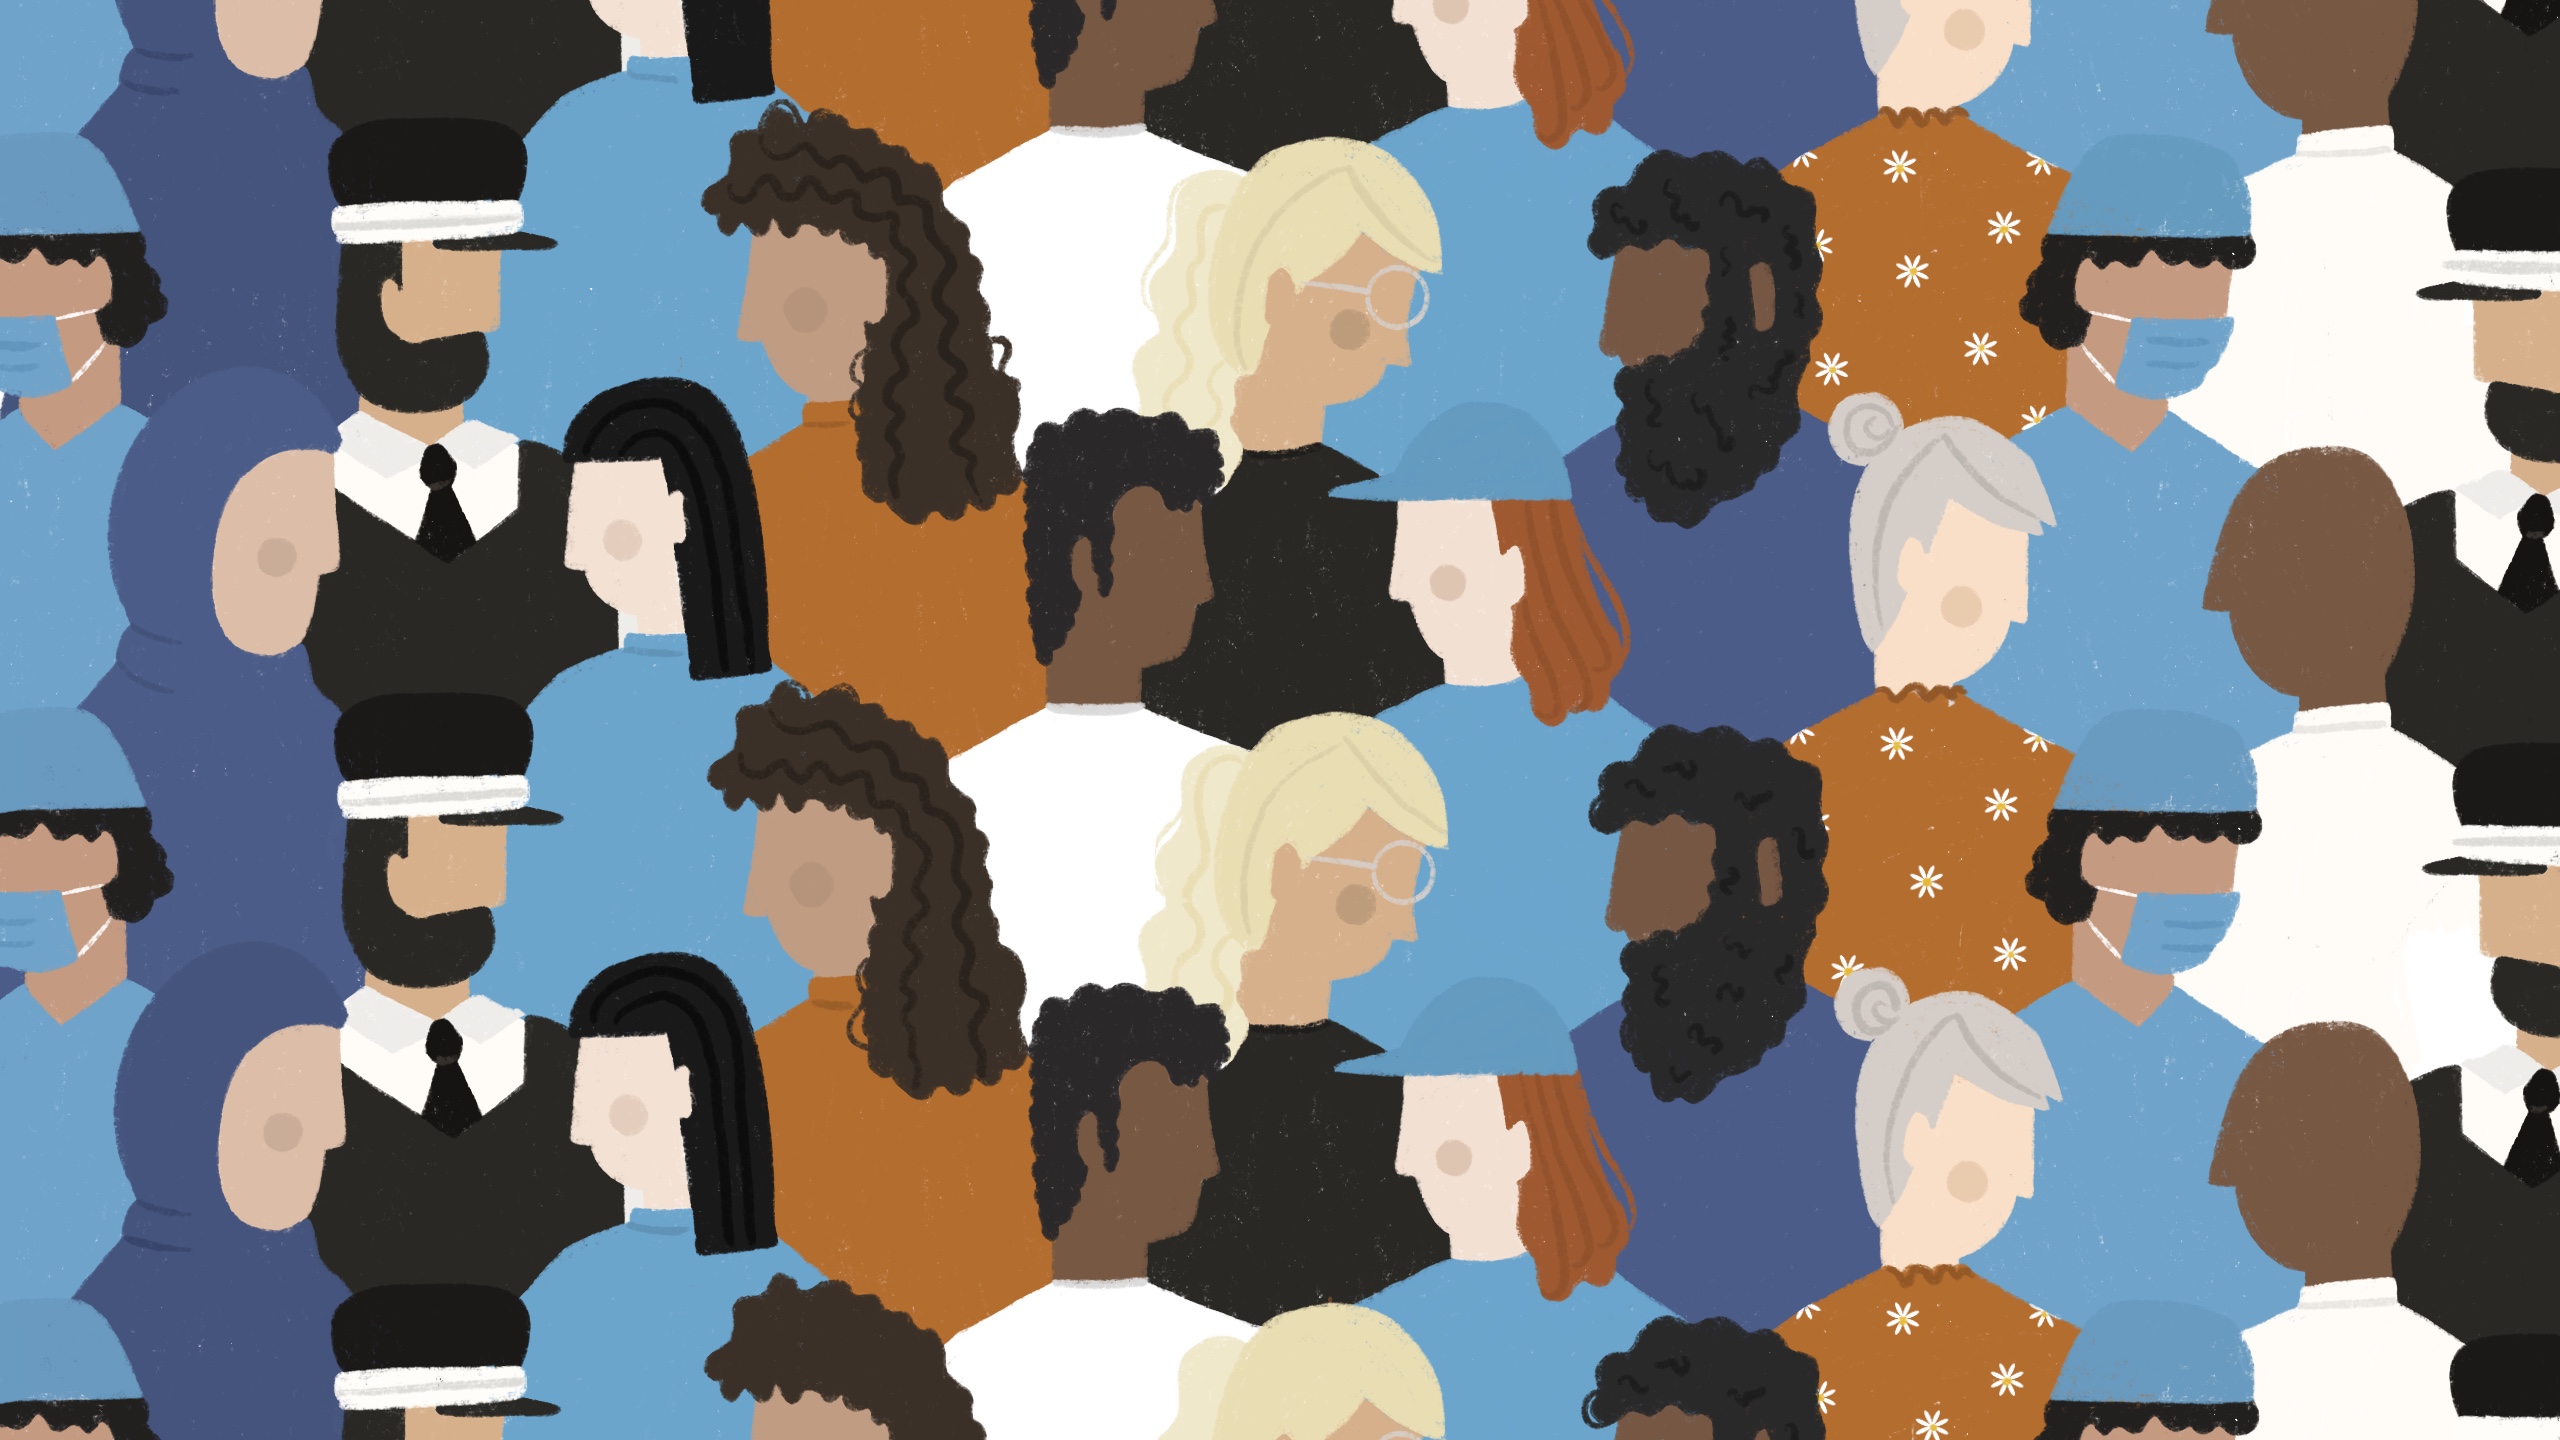 Repeating illustrations of faceless people from varying backgrounds.